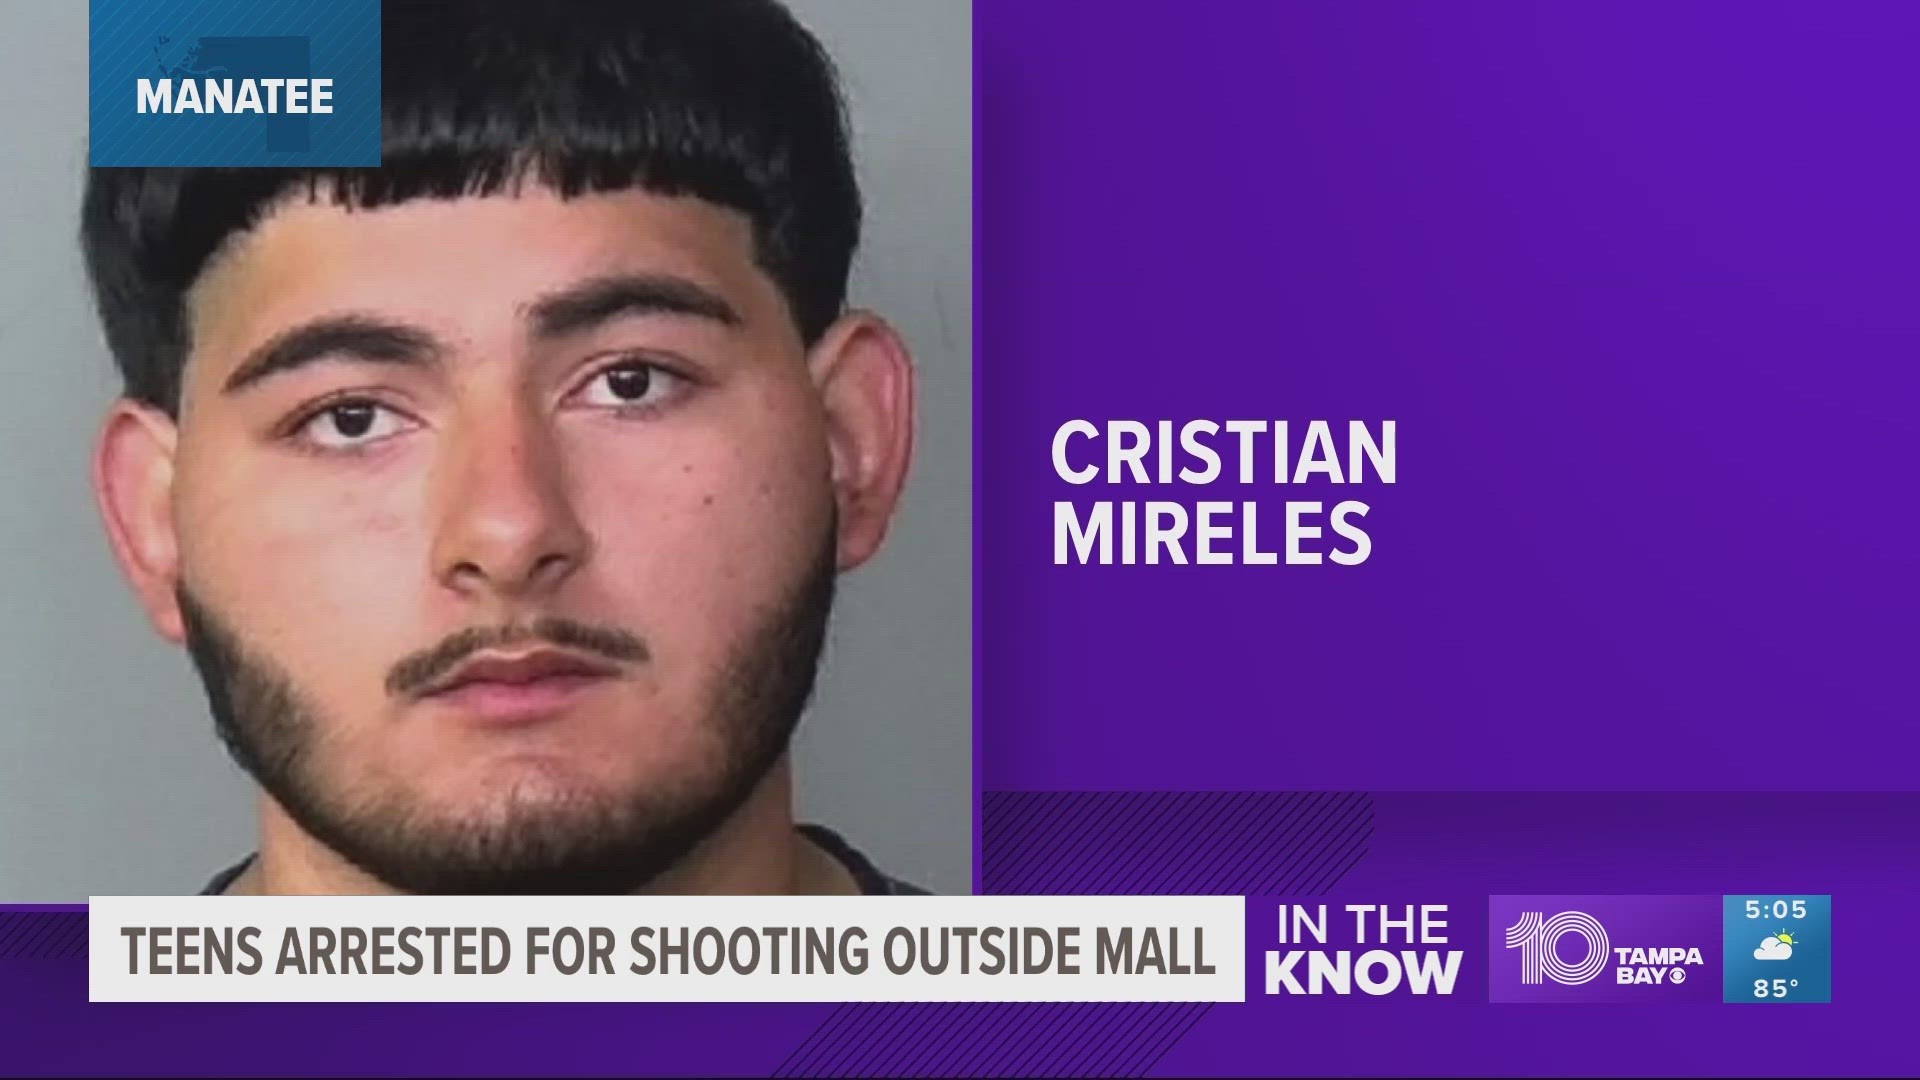 Detectives said 18-year-old Cristian Mireles and a 17-year-old shot multiple rounds into another car.